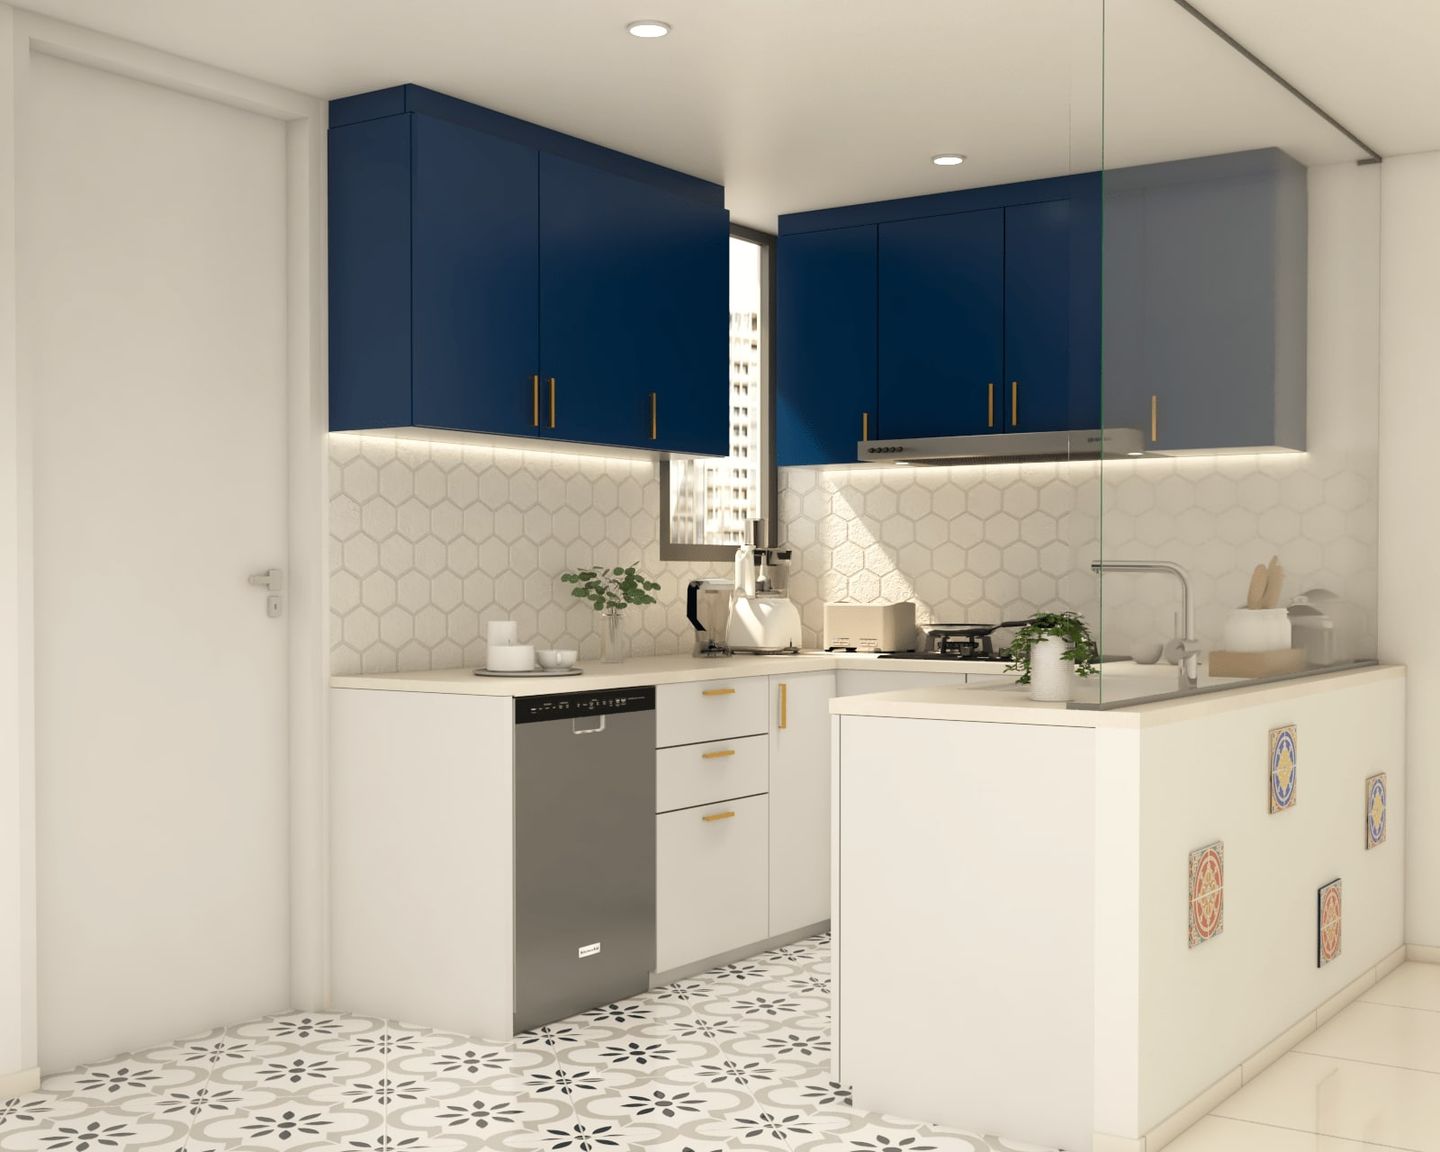 Contemporary White And Blue Laminate Design For Kitchens